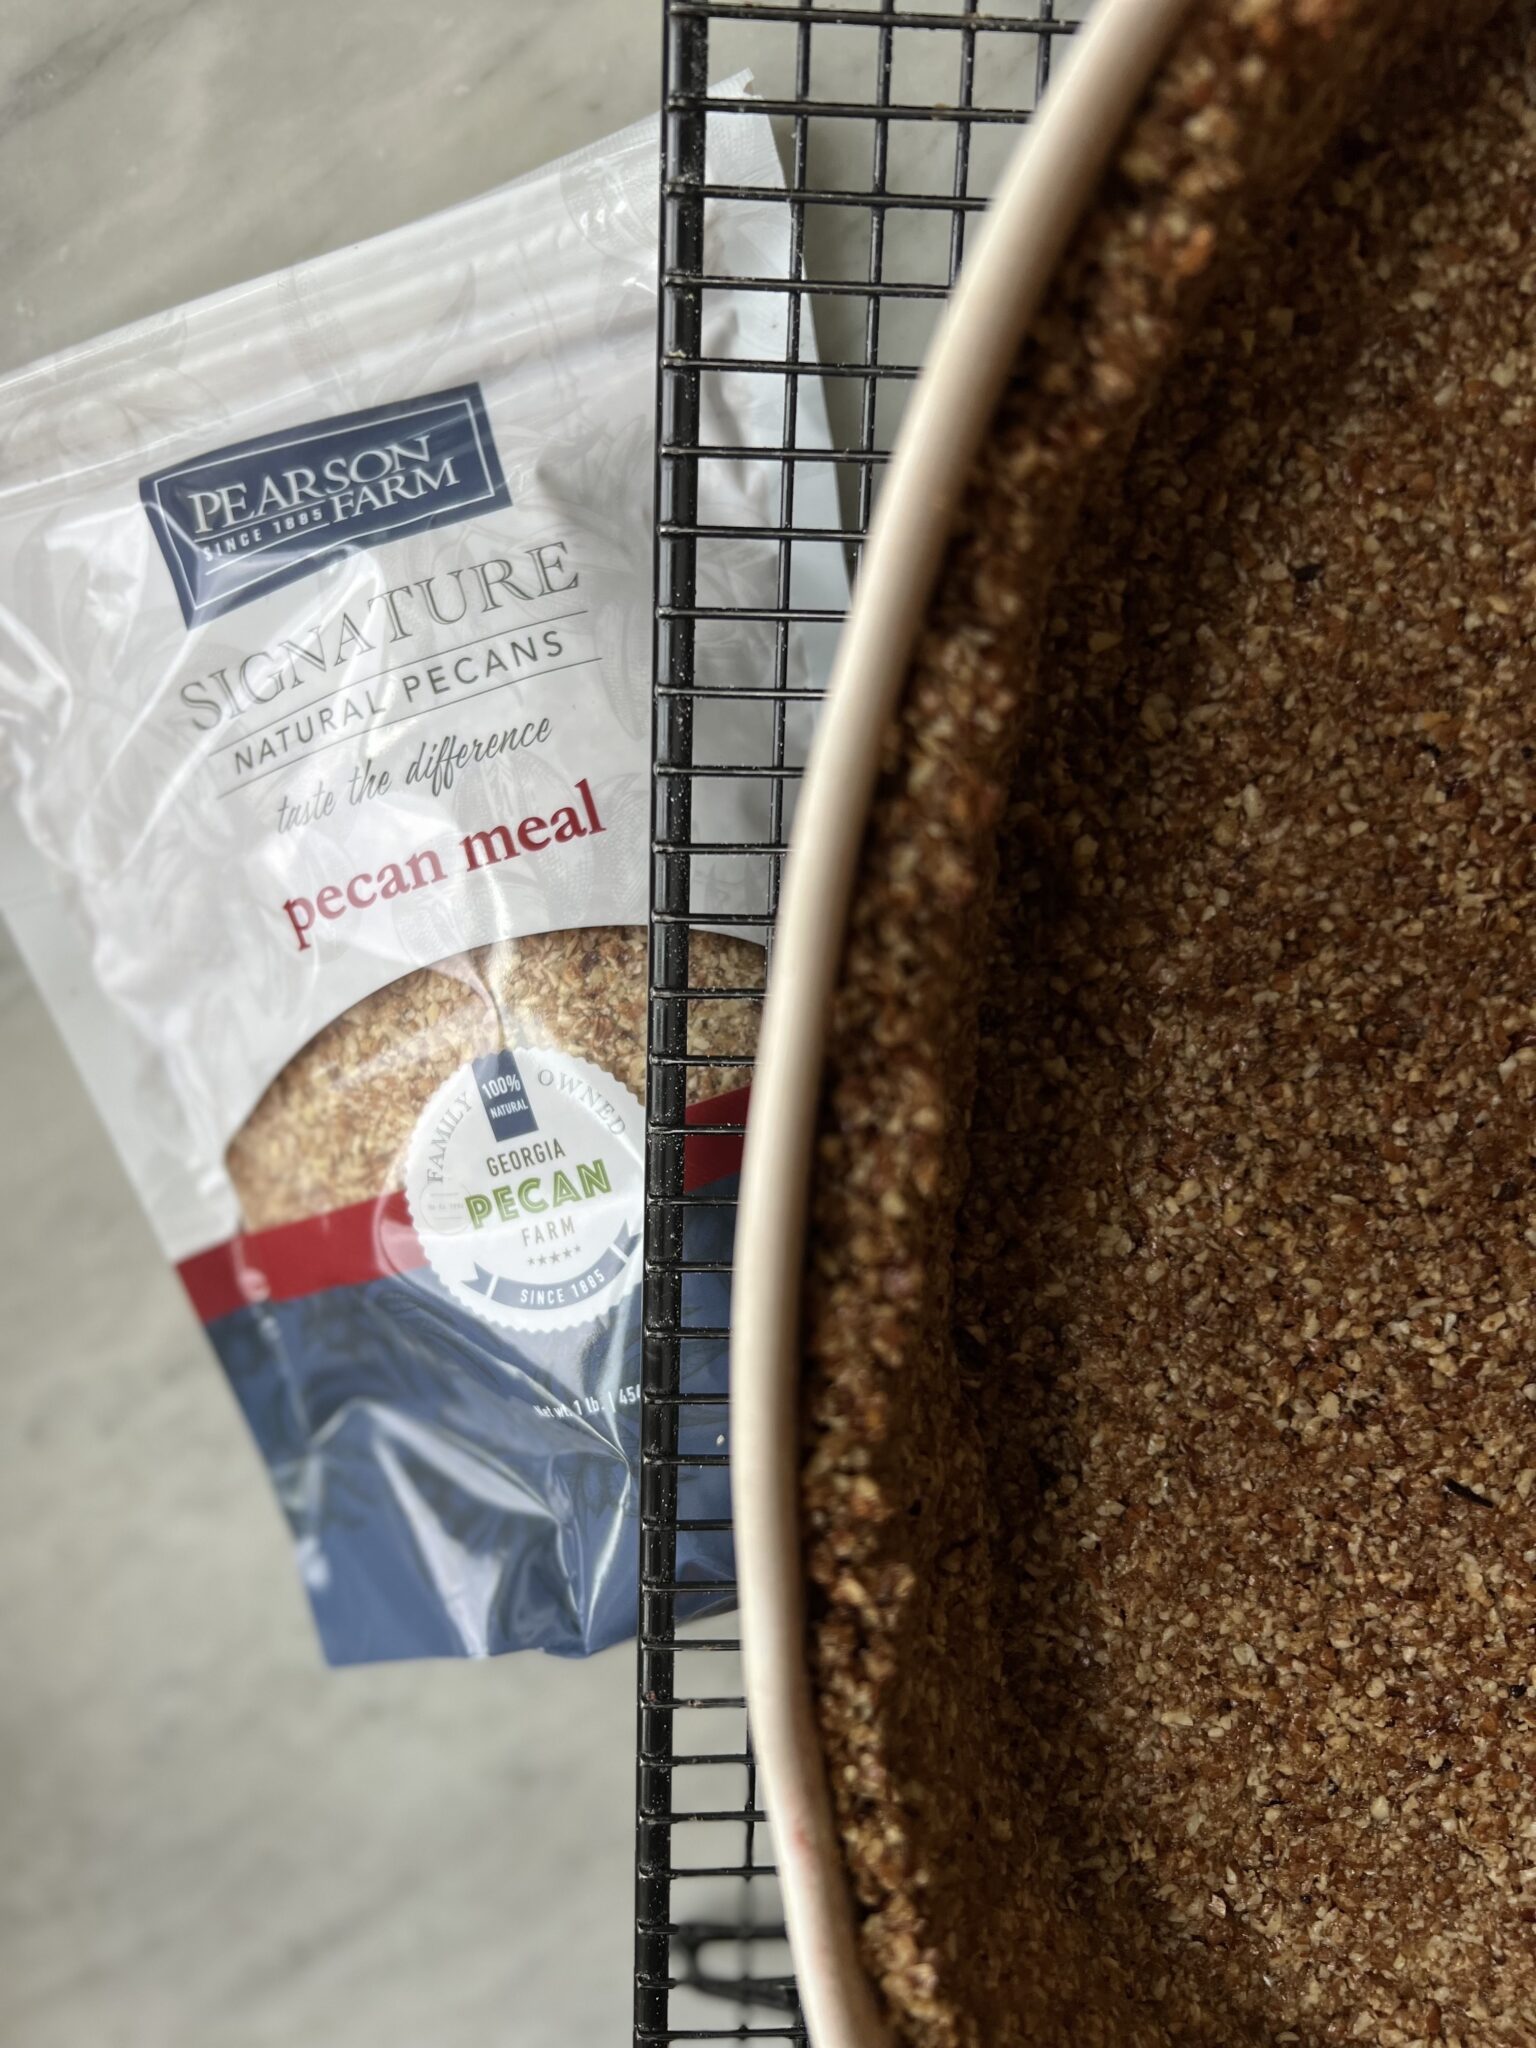 bag of Pearson Farm pecan meal and a pan with crust in it